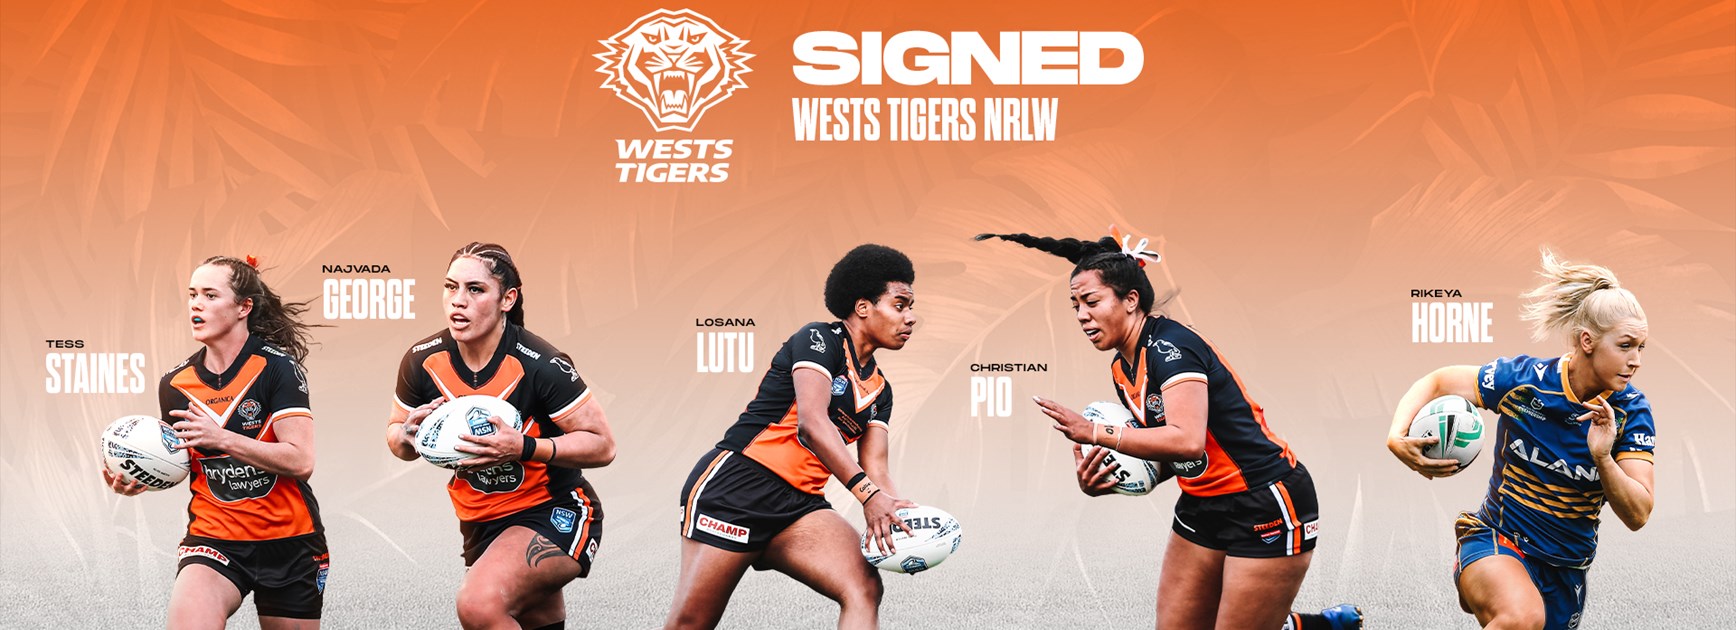 Wests Tigers announce a further five NRLW players